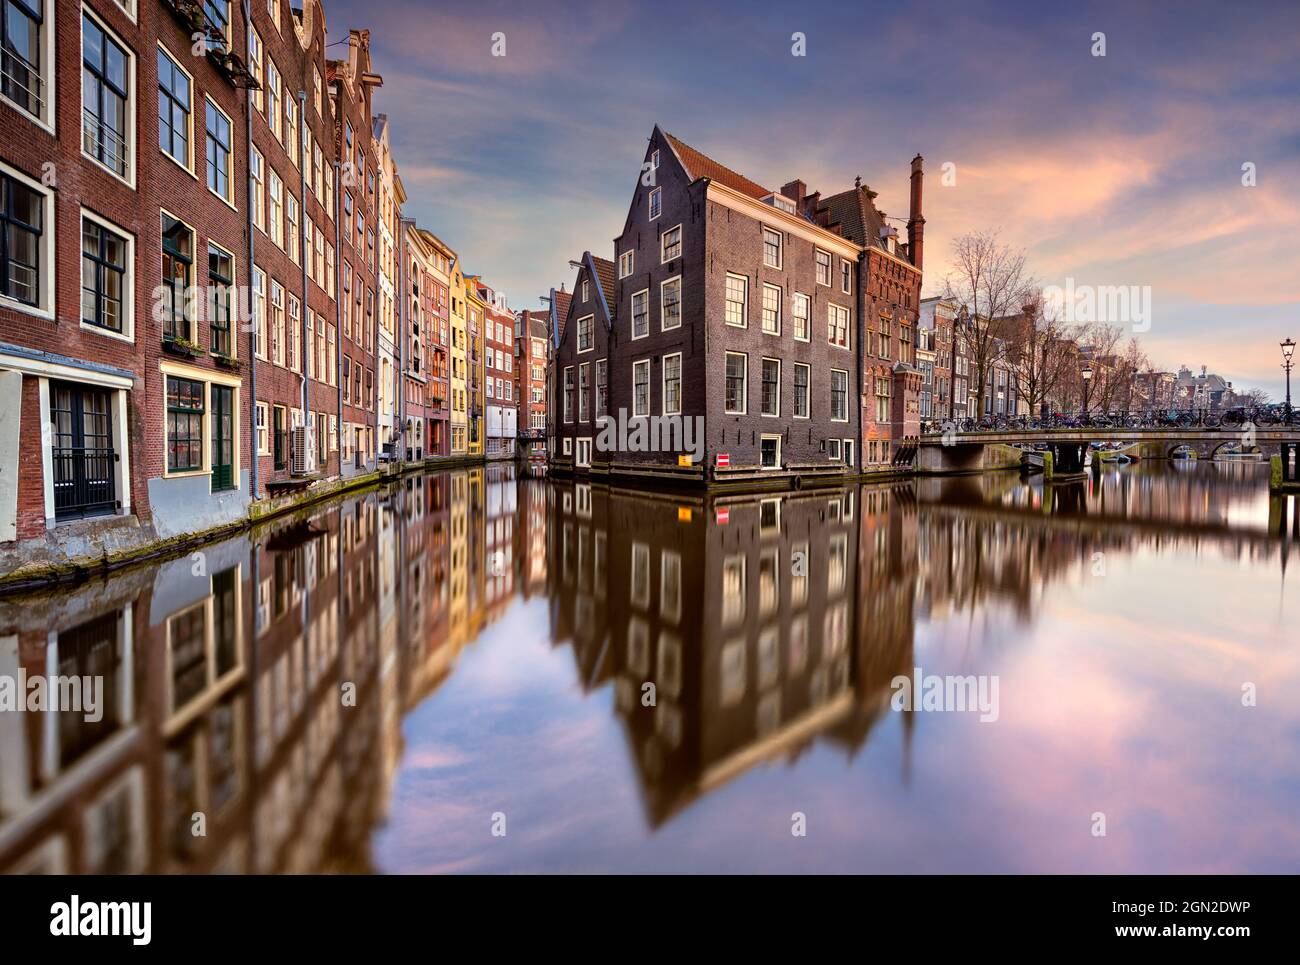 NETHERLANDS, AMSTERDAM, TYPICAL HOUSES AND THEIR REFLECTIONS ON THE CANAL AT SUNSET Stock Photo